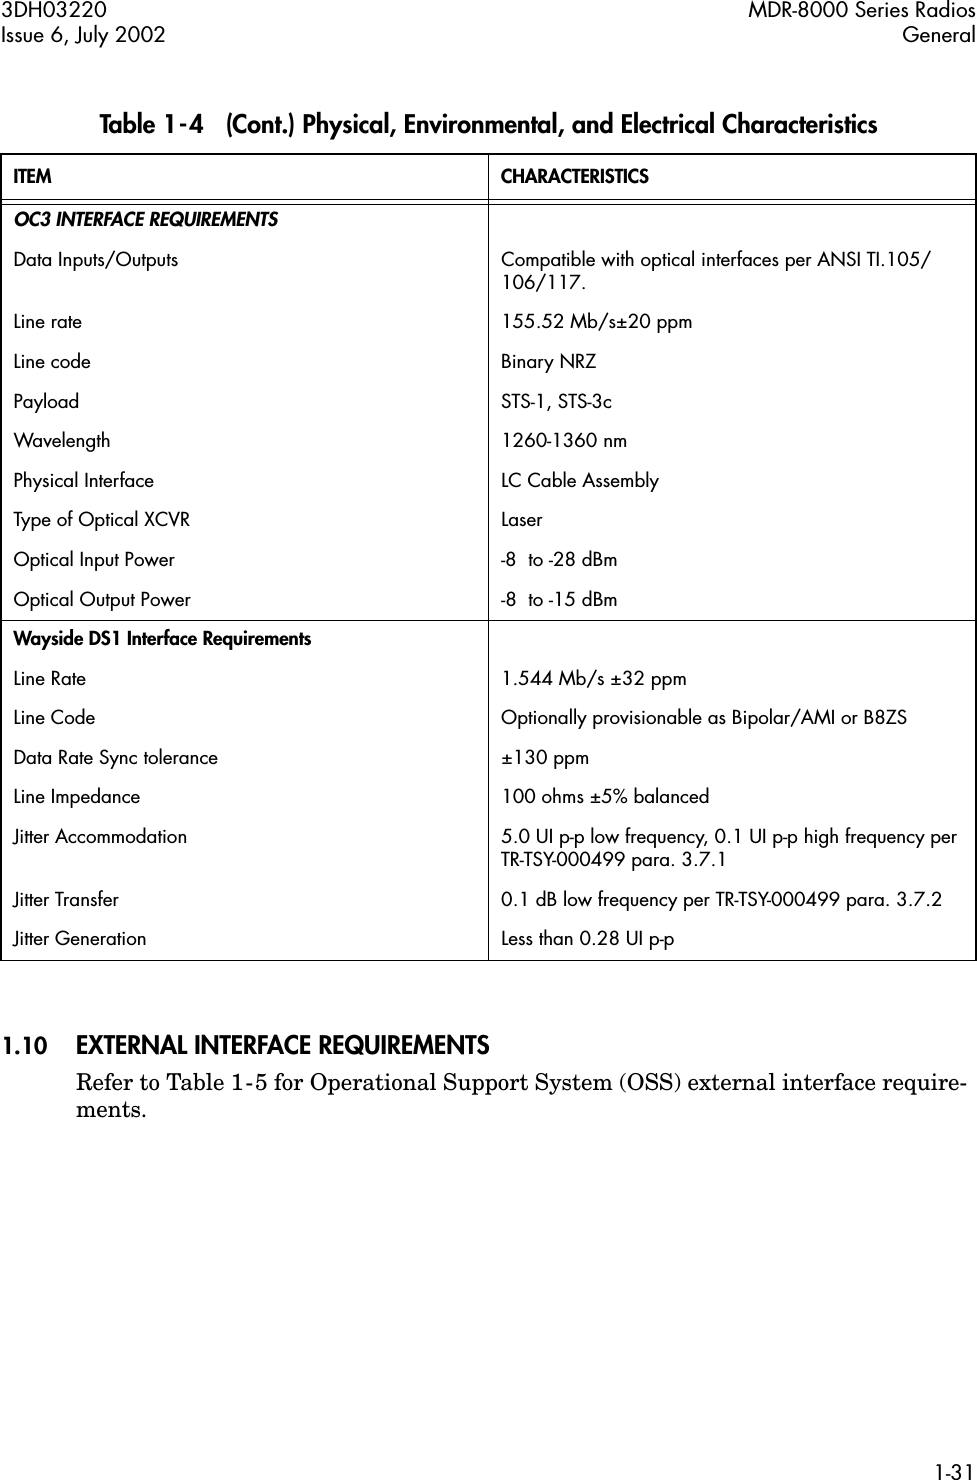 3DH03220 MDR-8000 Series RadiosIssue 6, July 2002 General1-311.10 EXTERNAL INTERFACE REQUIREMENTSRefer to Table 1-5 for Operational Support System (OSS) external interface require-ments.OC3 INTERFACE REQUIREMENTSData Inputs/Outputs Compatible with optical interfaces per ANSI TI.105/106/117.Line rate 155.52 Mb/s±20 ppmLine code Binary NRZPayload STS-1, STS-3cWavelength 1260-1360 nmPhysical Interface LC Cable AssemblyType of Optical XCVR LaserOptical Input Power -8  to -28 dBmOptical Output Power -8  to -15 dBmWayside DS1 Interface RequirementsLine Rate 1.544 Mb/s ±32 ppmLine Code Optionally provisionable as Bipolar/AMI or B8ZS Data Rate Sync tolerance ±130 ppmLine Impedance 100 ohms ±5% balancedJitter Accommodation 5.0 UI p-p low frequency, 0.1 UI p-p high frequency per TR-TSY-000499 para. 3.7.1Jitter Transfer 0.1 dB low frequency per TR-TSY-000499 para. 3.7.2Jitter Generation Less than 0.28 UI p-pTable 1-4   (Cont.) Physical, Environmental, and Electrical CharacteristicsITEM CHARACTERISTICS